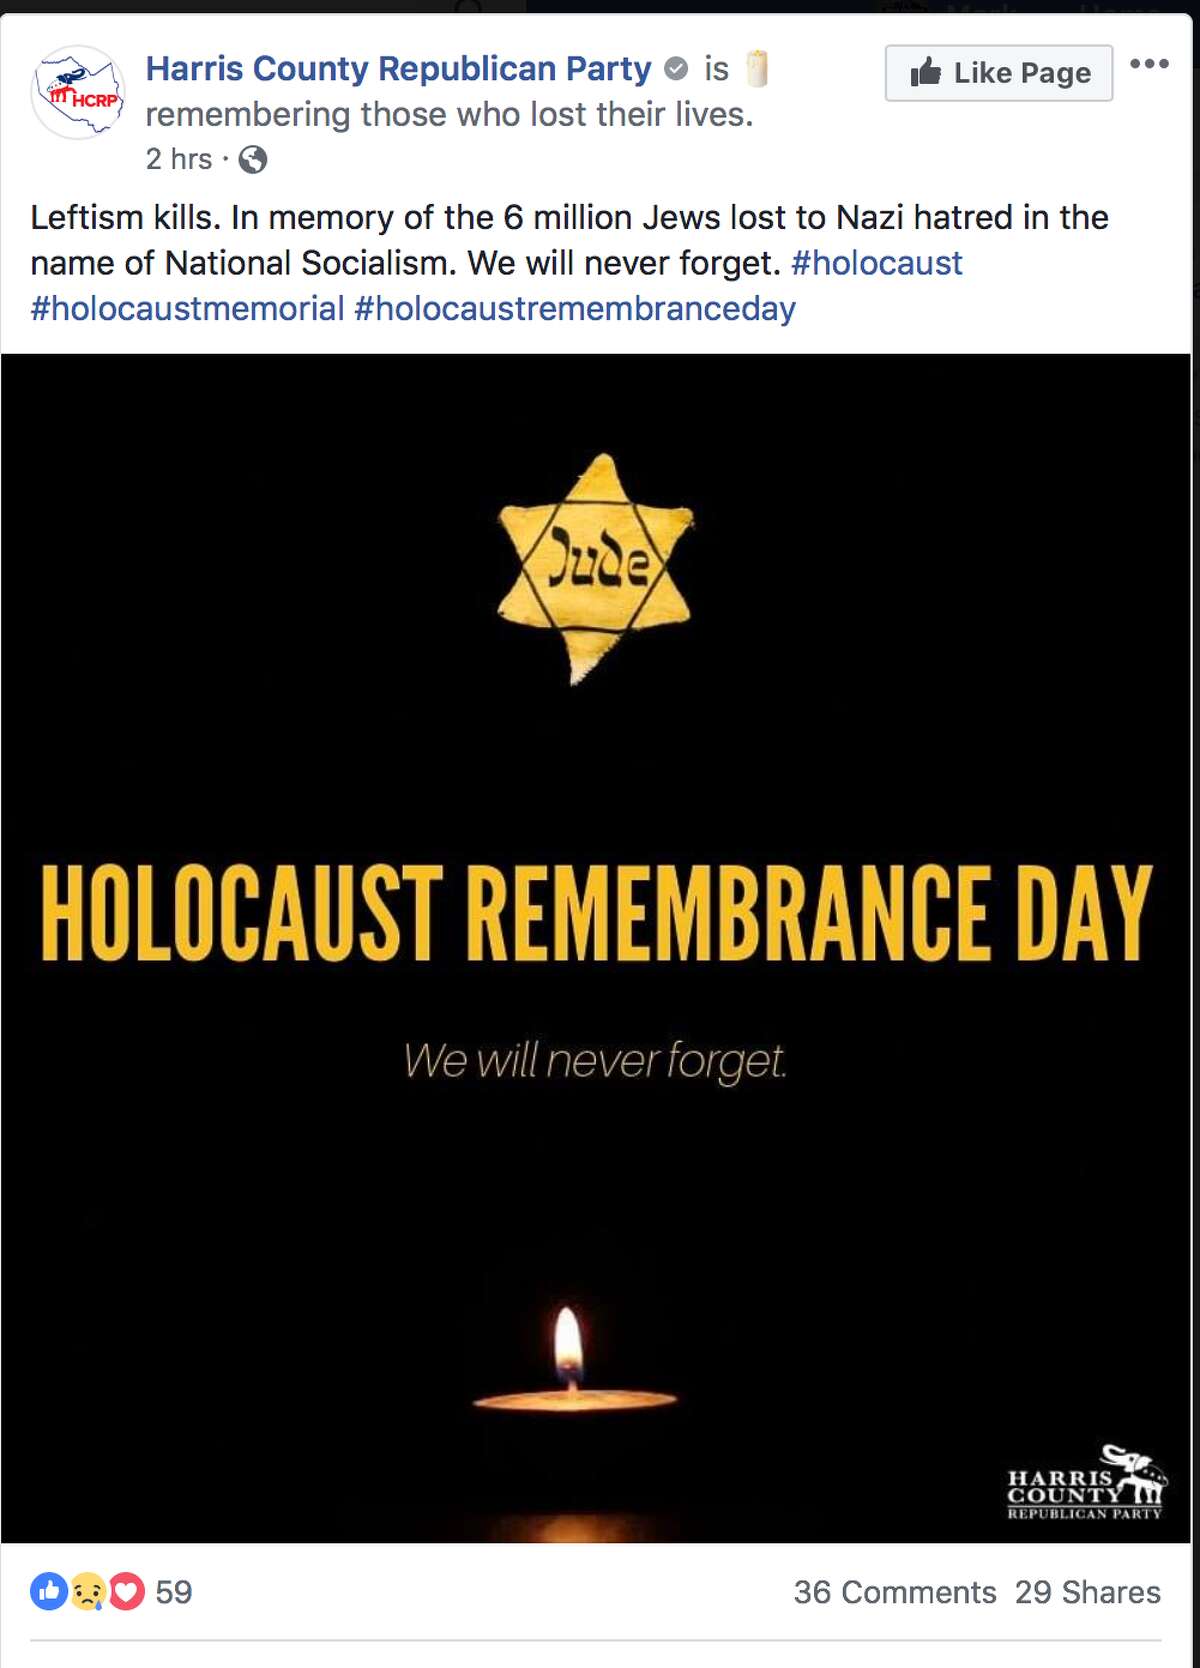 Harris County Republican Party's Holocaust post on its Facebook page earlier Sunday. It has since been removed.